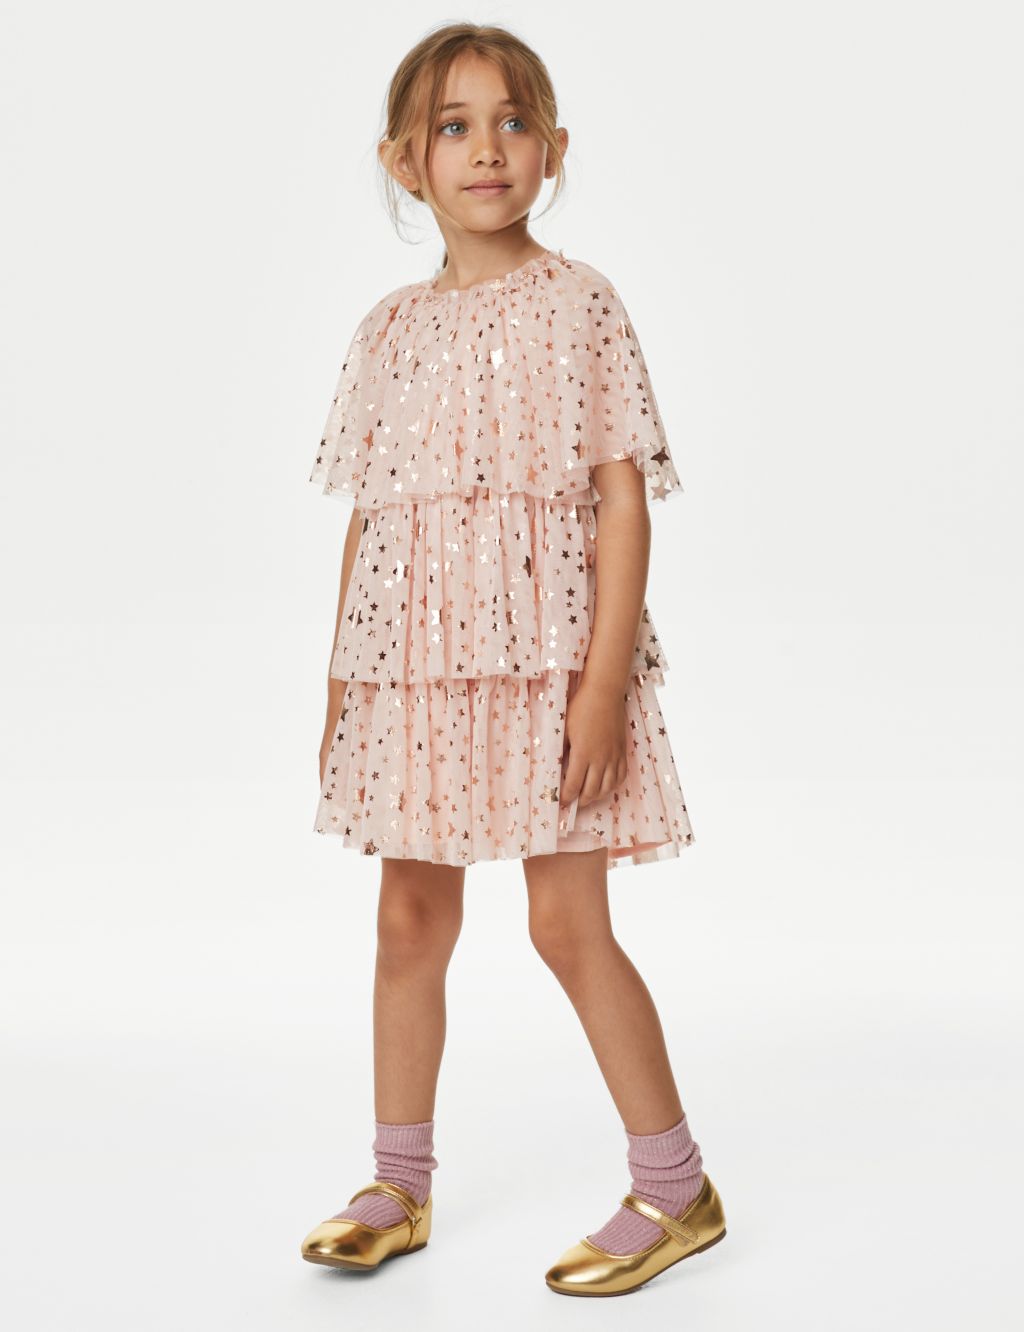 Tulle Star Print Tiered Party Dress (2-8 Yrs) image 3